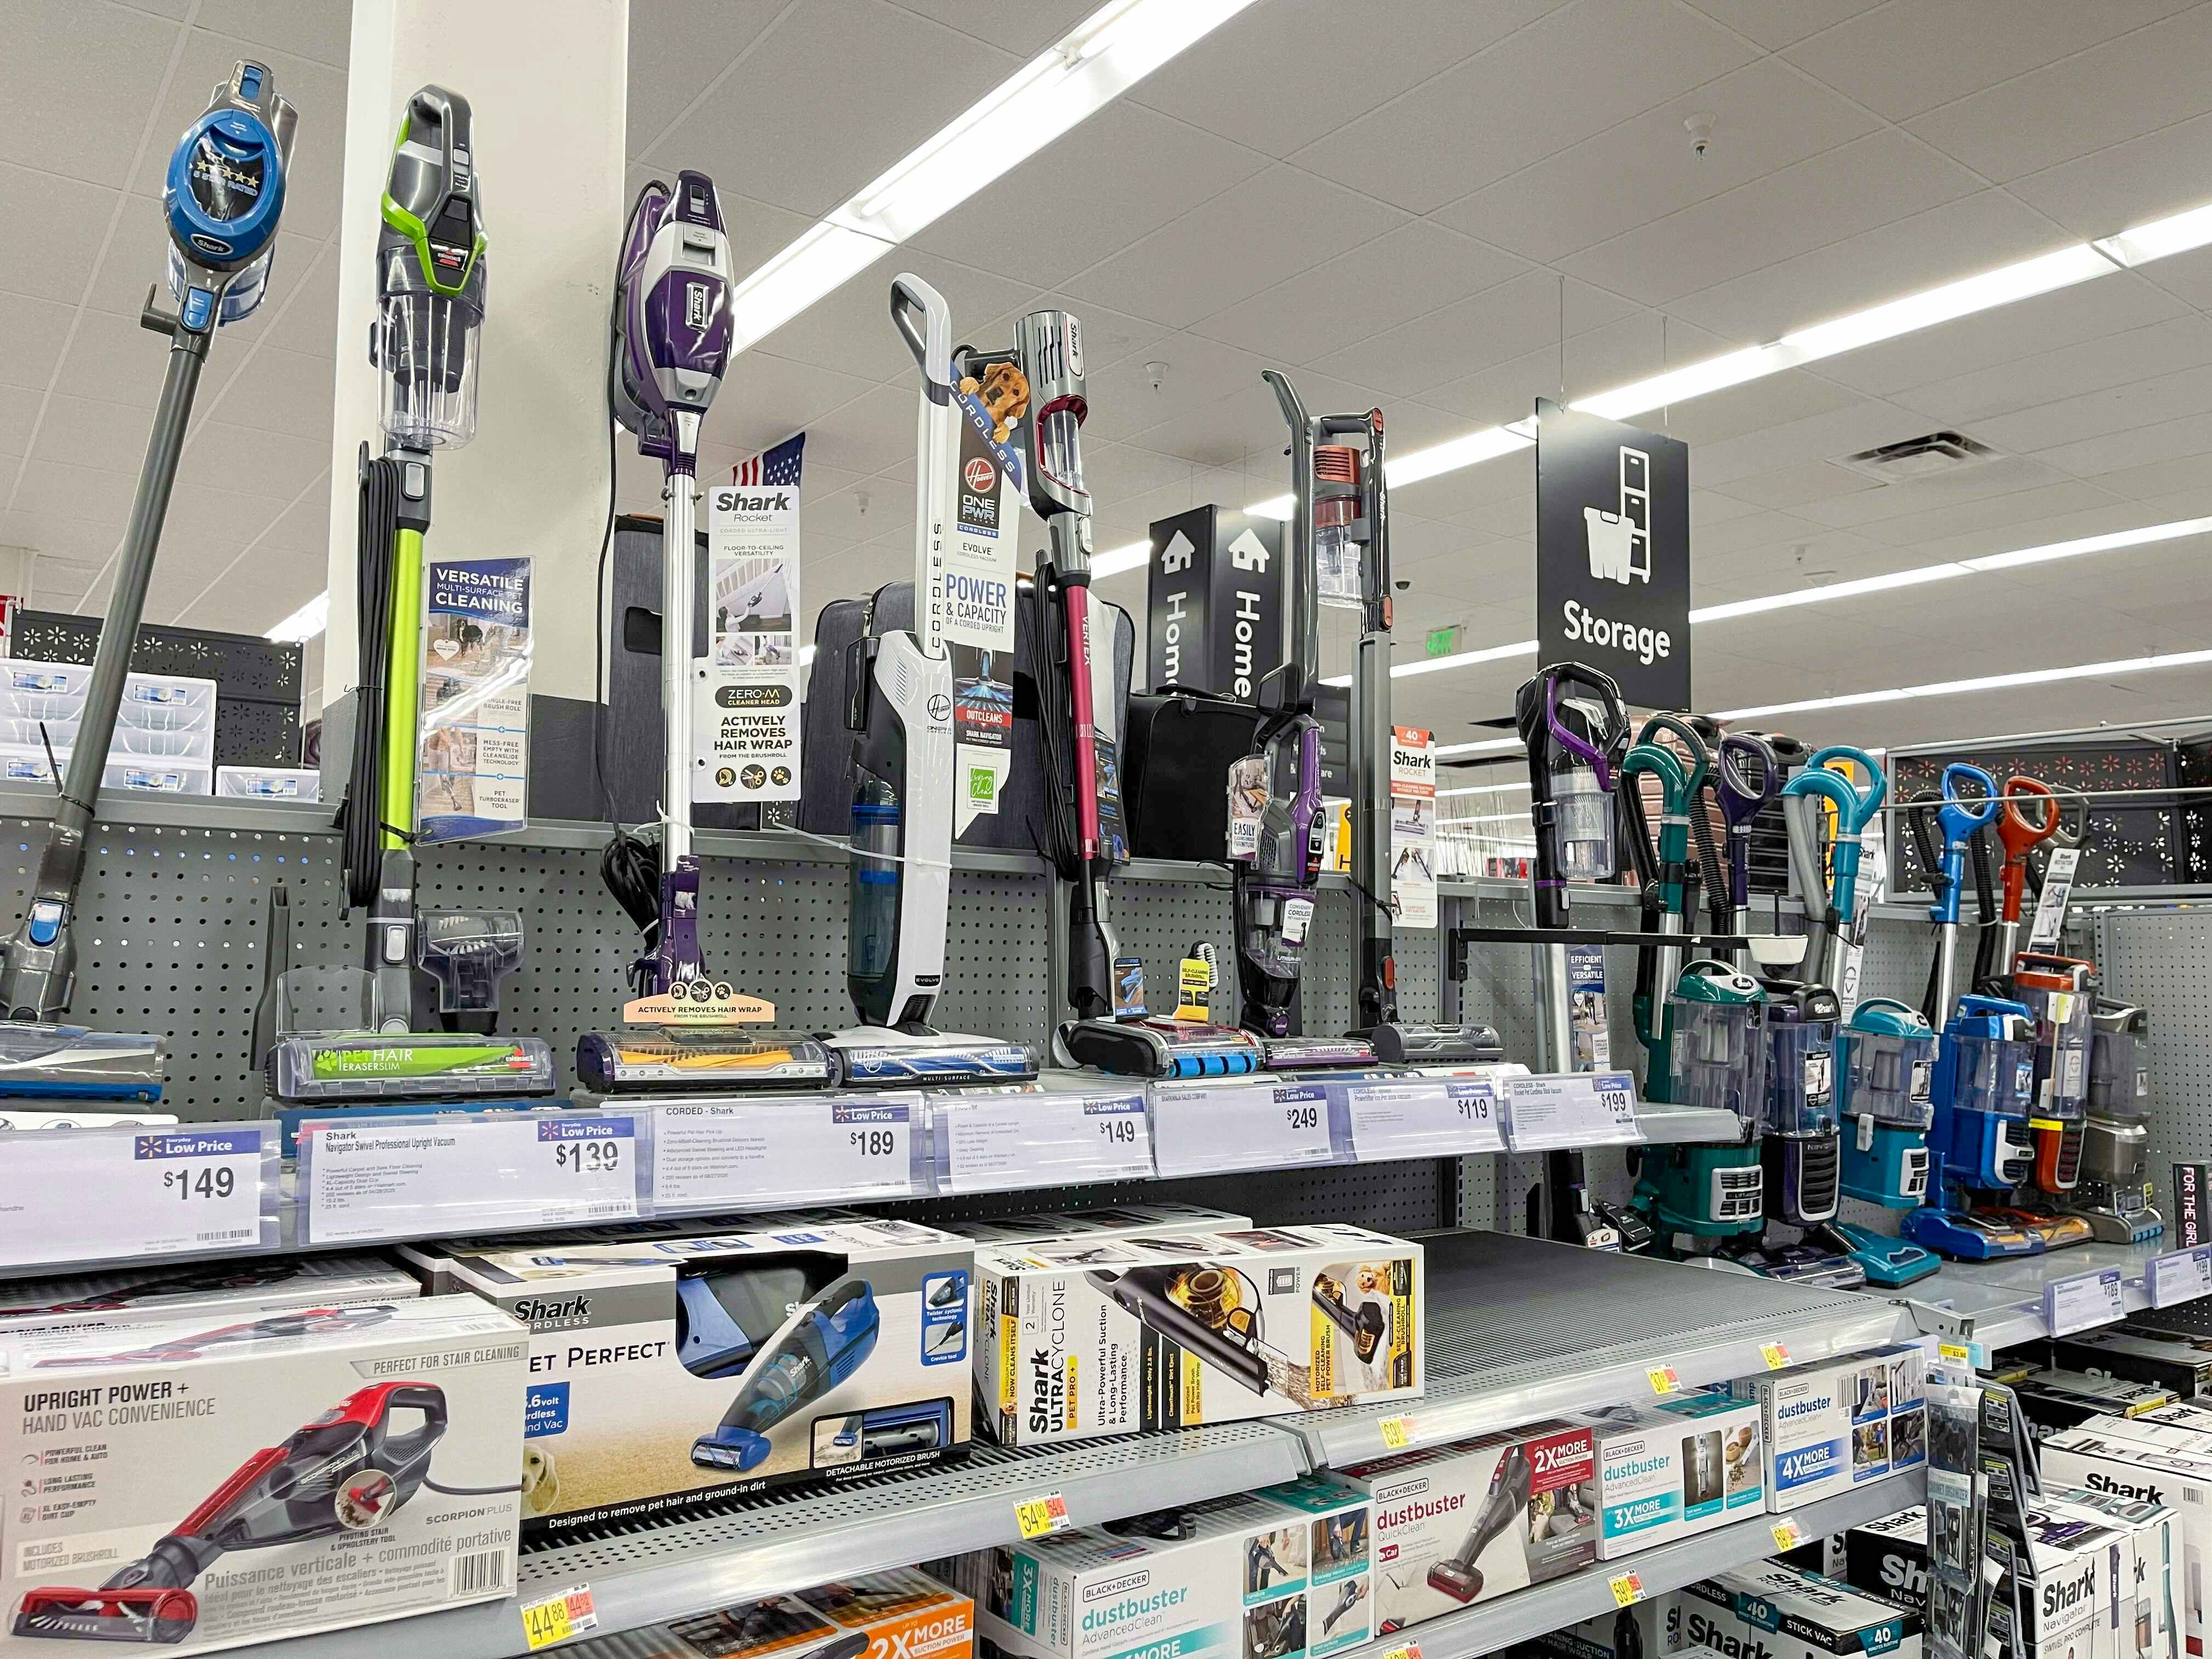 A view of the vacuum selection and display at Walmart.